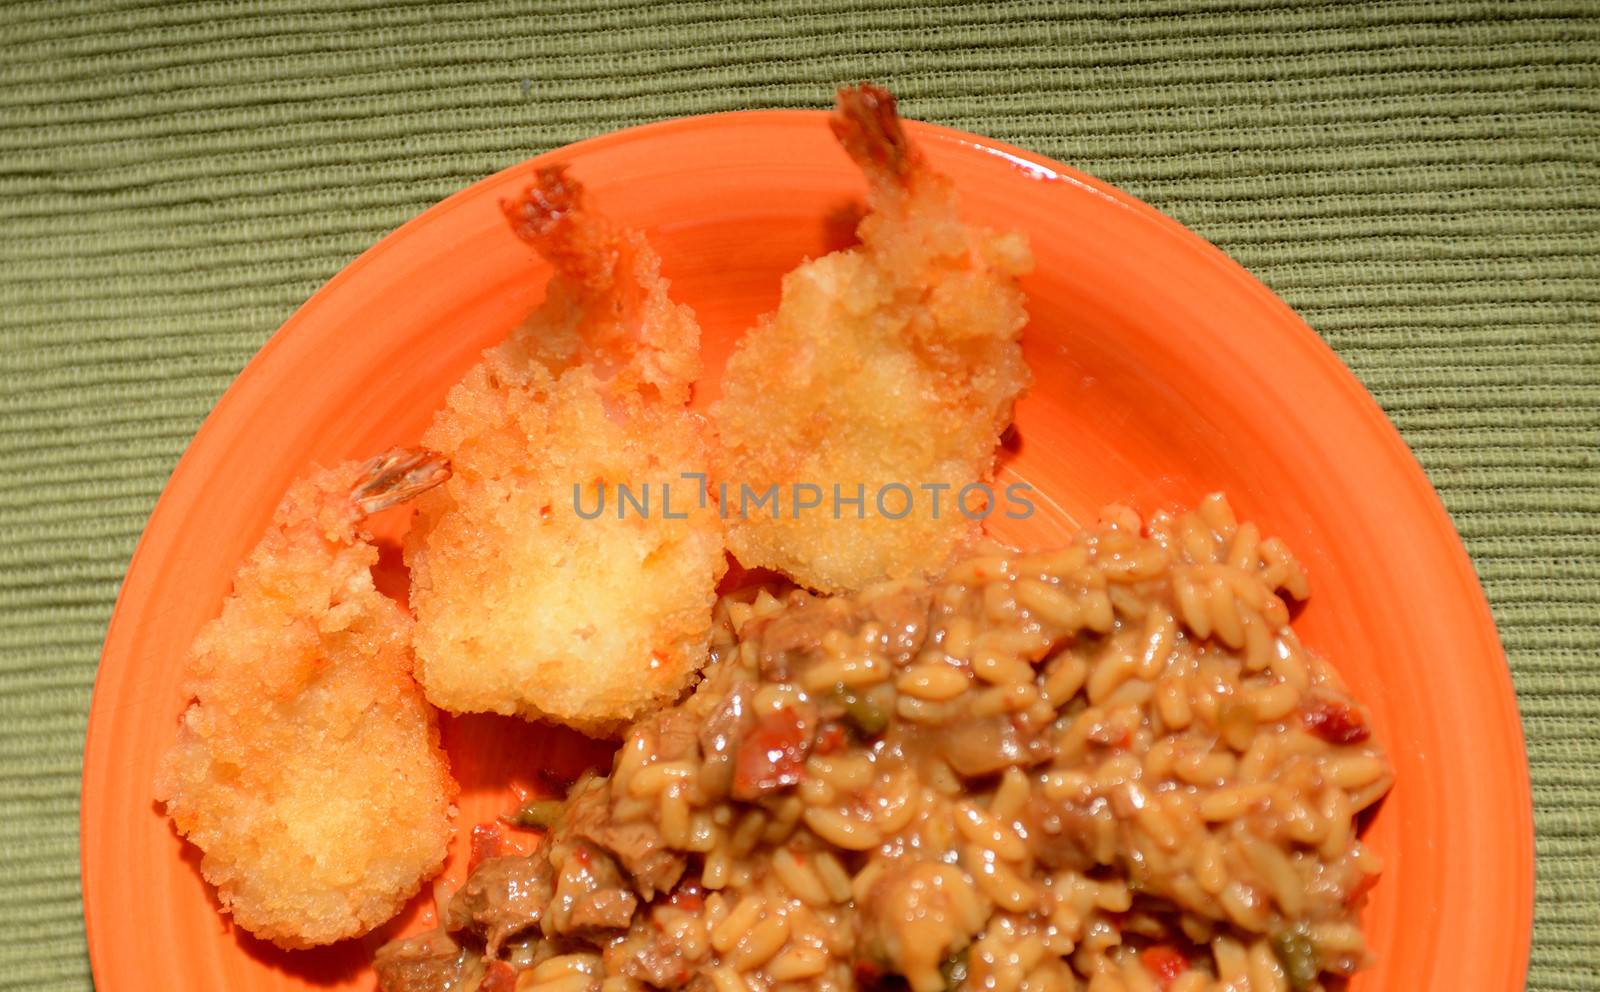 fried shrimp and rice dish by ftlaudgirl